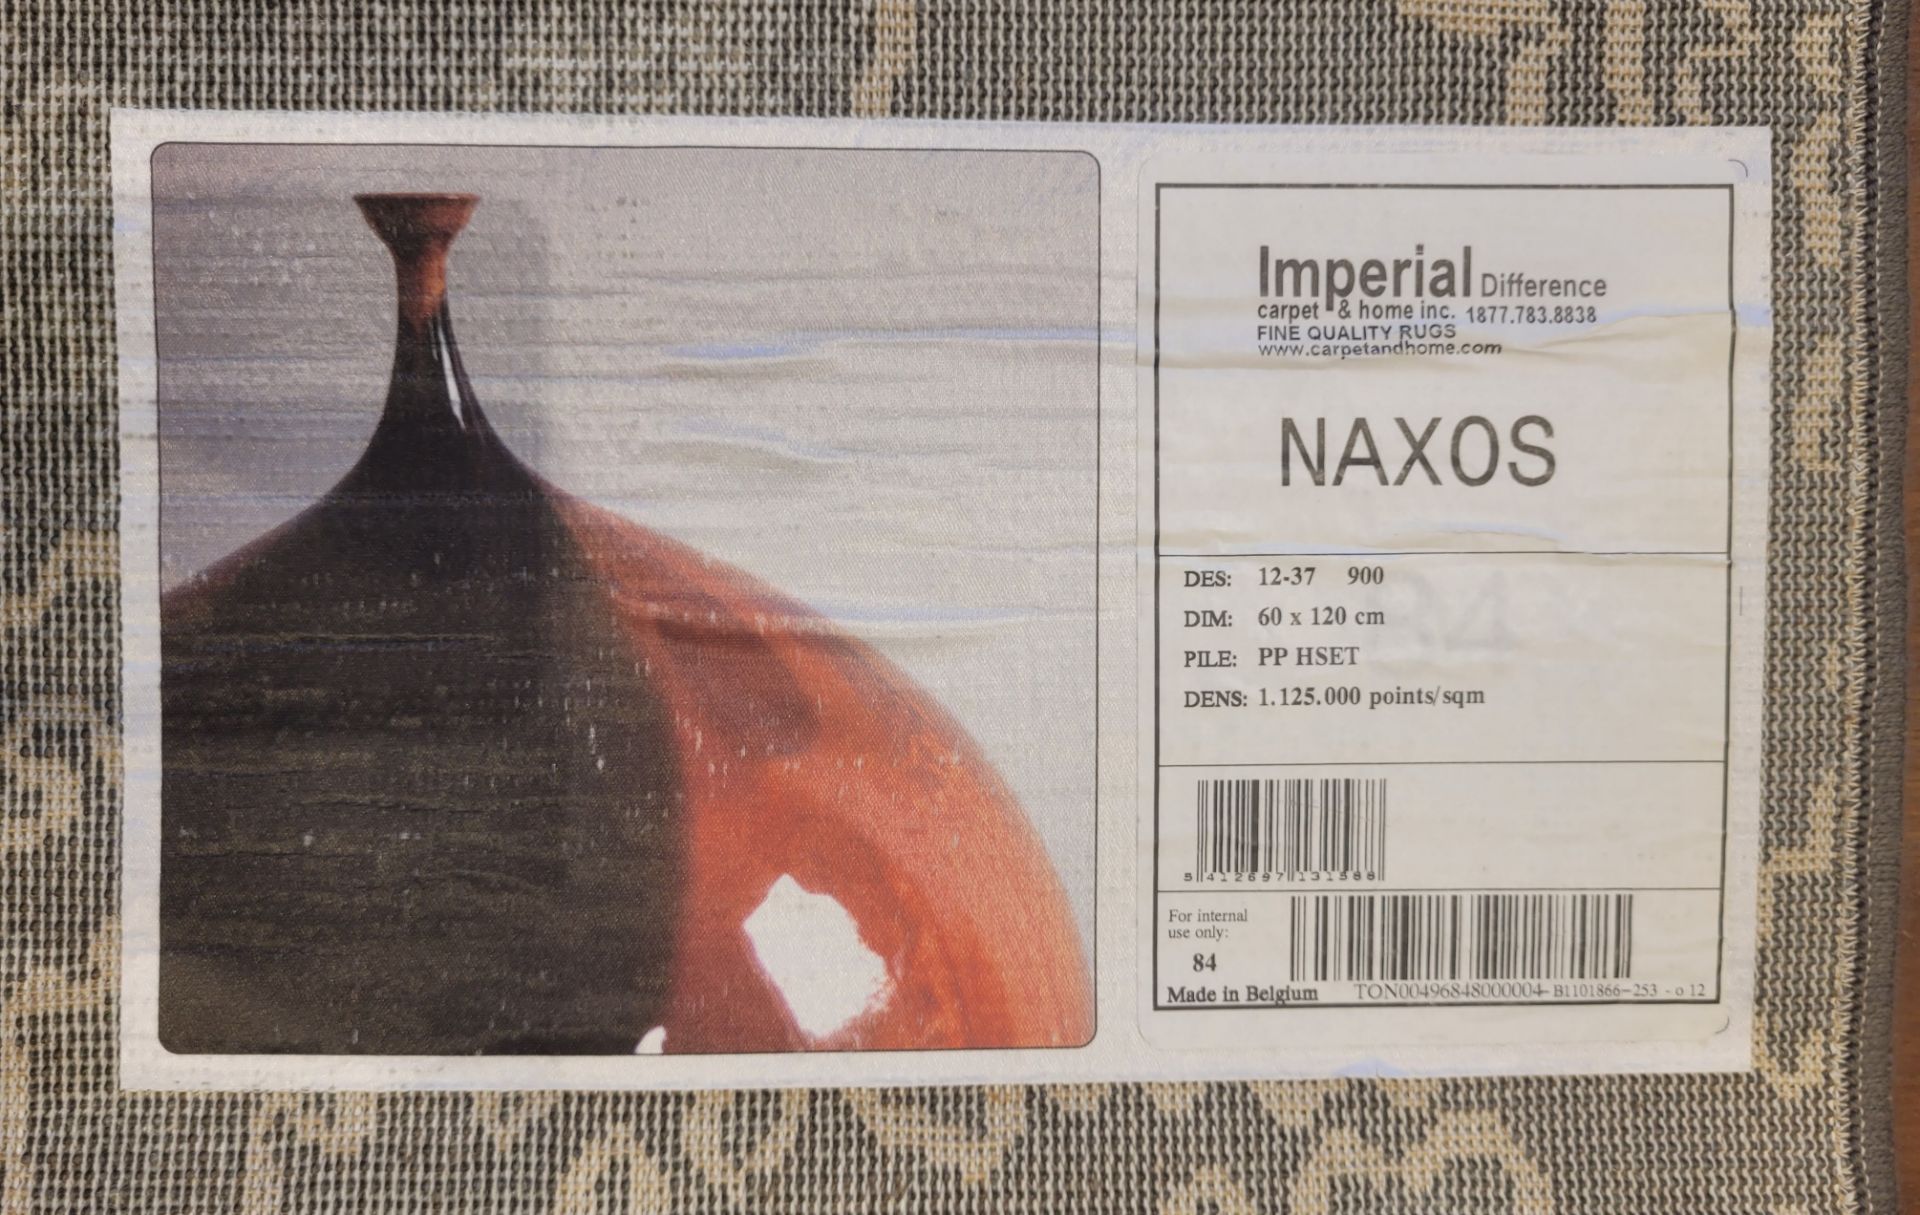 2' X 4' NAXOS MADE IN BELGIUM - MSRP $199.00 EA. (LOCATED IN WALL-TO-WALL) INVENTORY CODE: 12-37 - Image 3 of 3